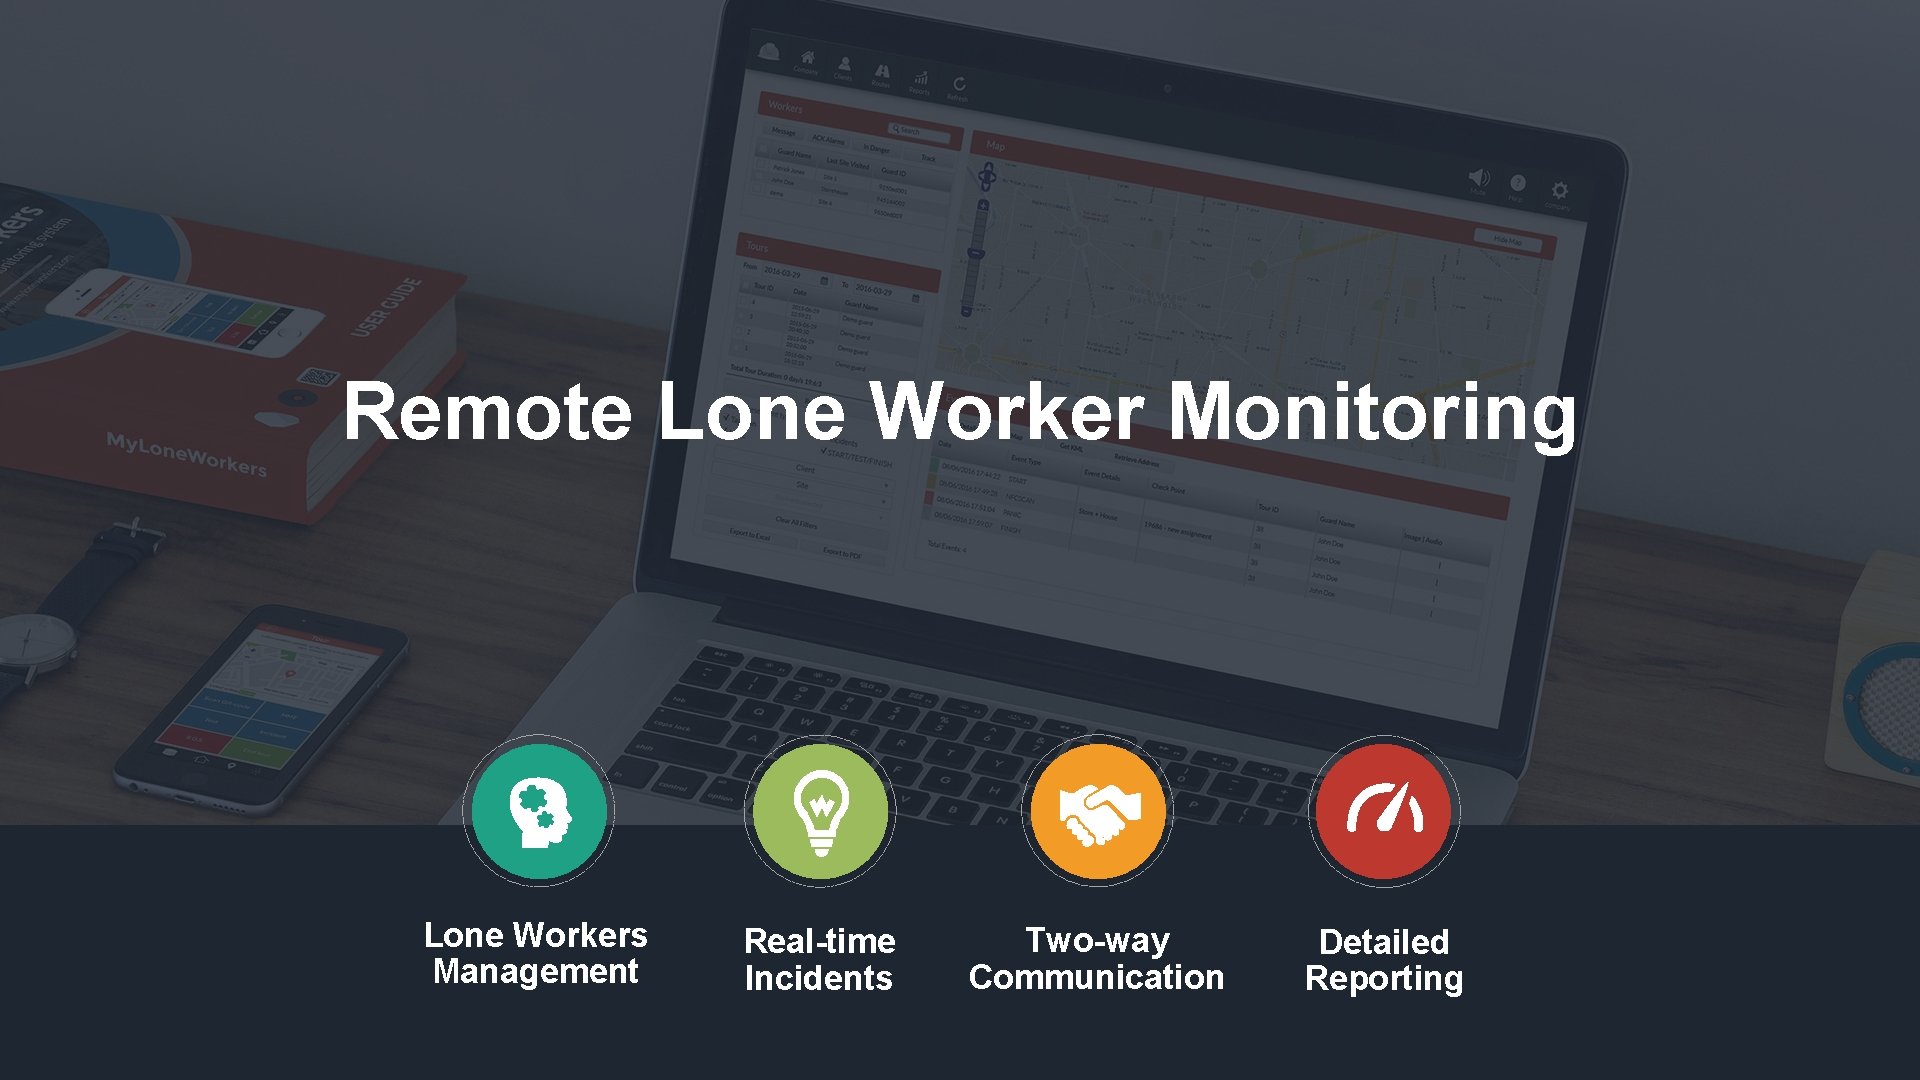 Remote Lone Worker Monitoring Lone Workers Management Real-time Incidents Two-way Communication Detailed Reporting 